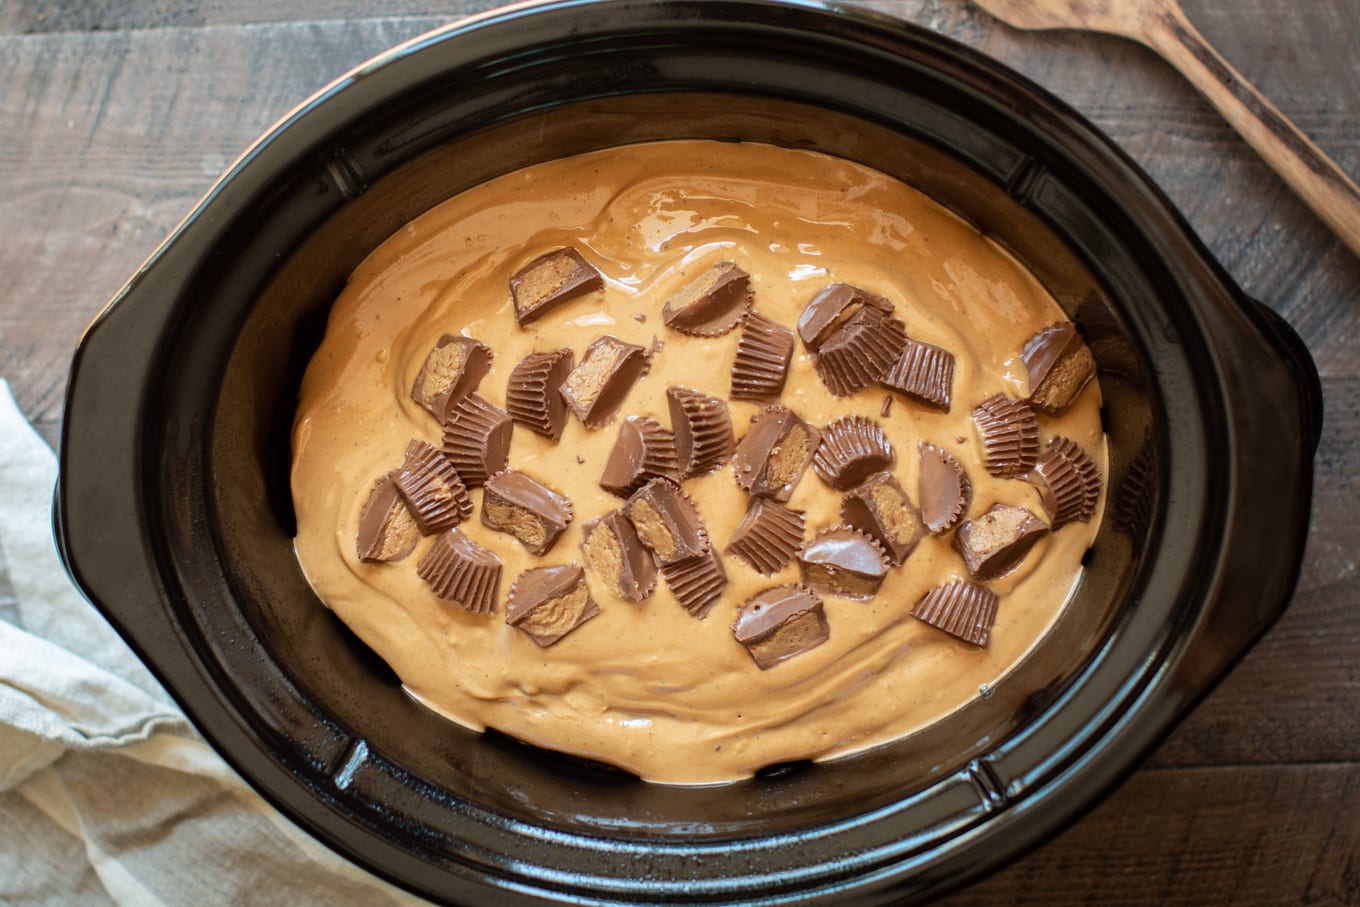 chocolate cake with warm peanut butter icing on top. With peanut butter cups on top.